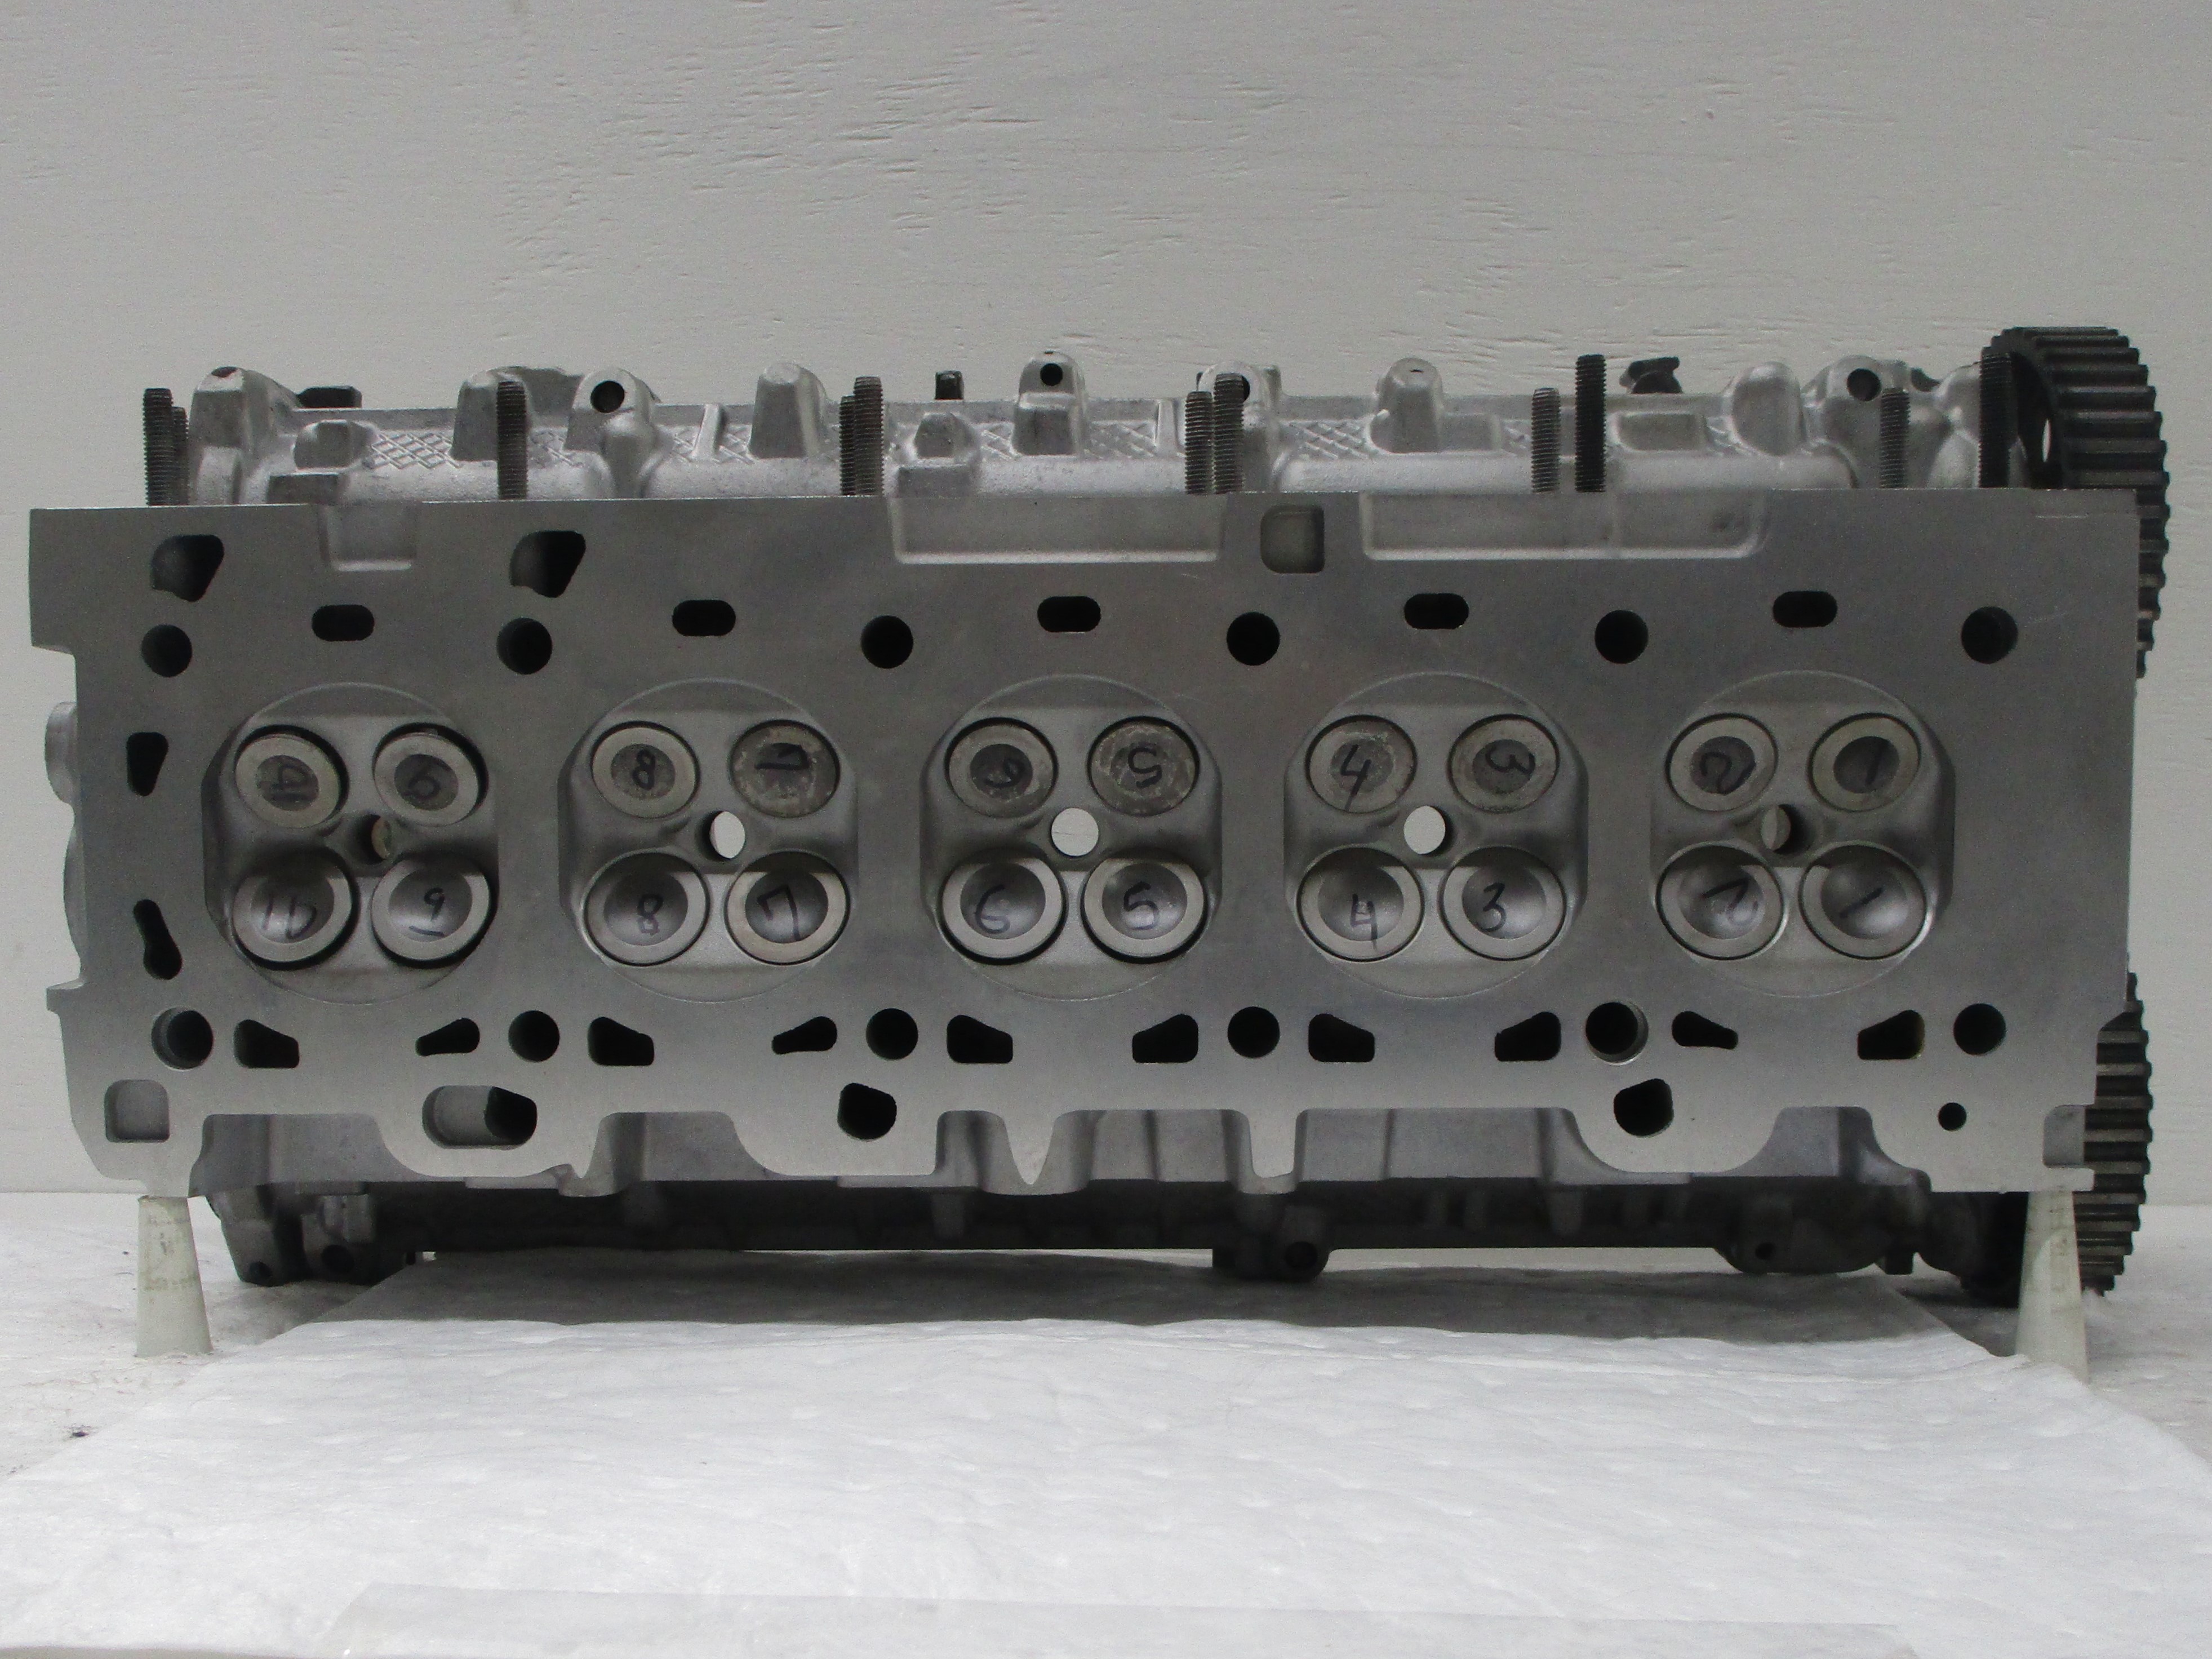 2006-2013 Volvo:  V70, S70, C70  2.4L/2.5L Reconditioned Cylinder Heads W/Cams - Casting #8642289007 - ($100 Core Charge)